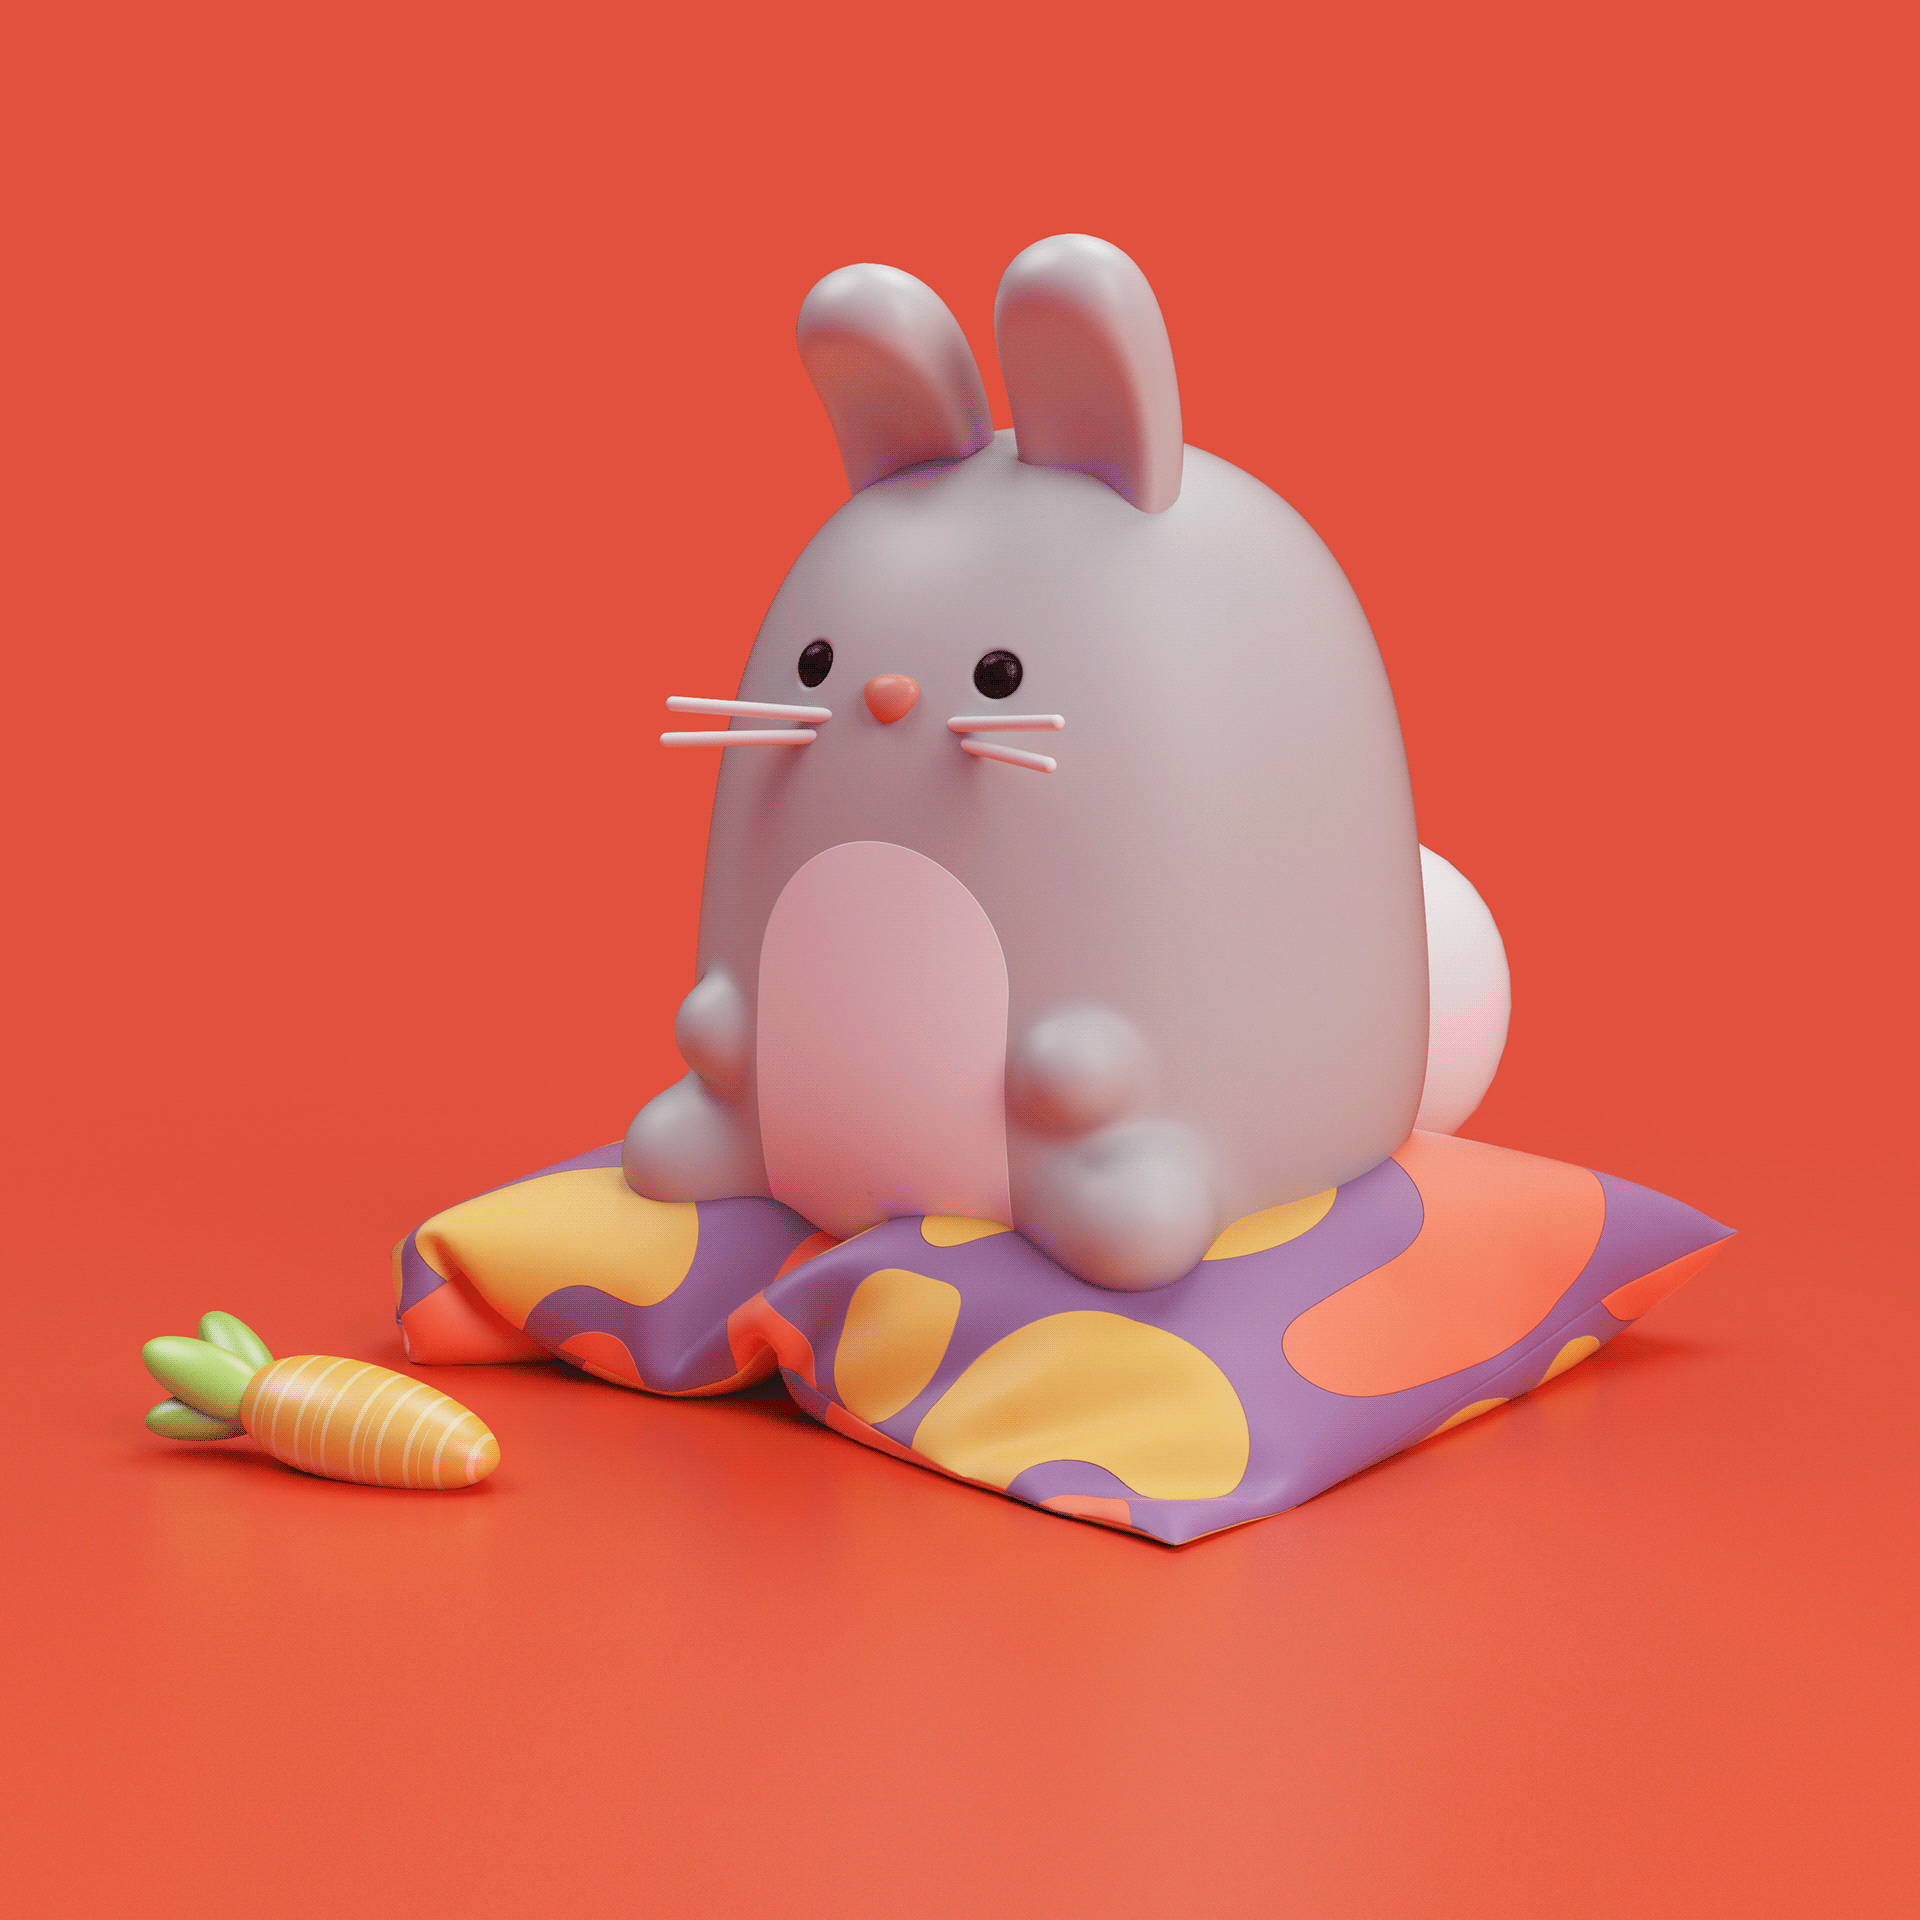 Collection | Art-Toy on Behance285c8a90282601.5e1387ca51ba6.png